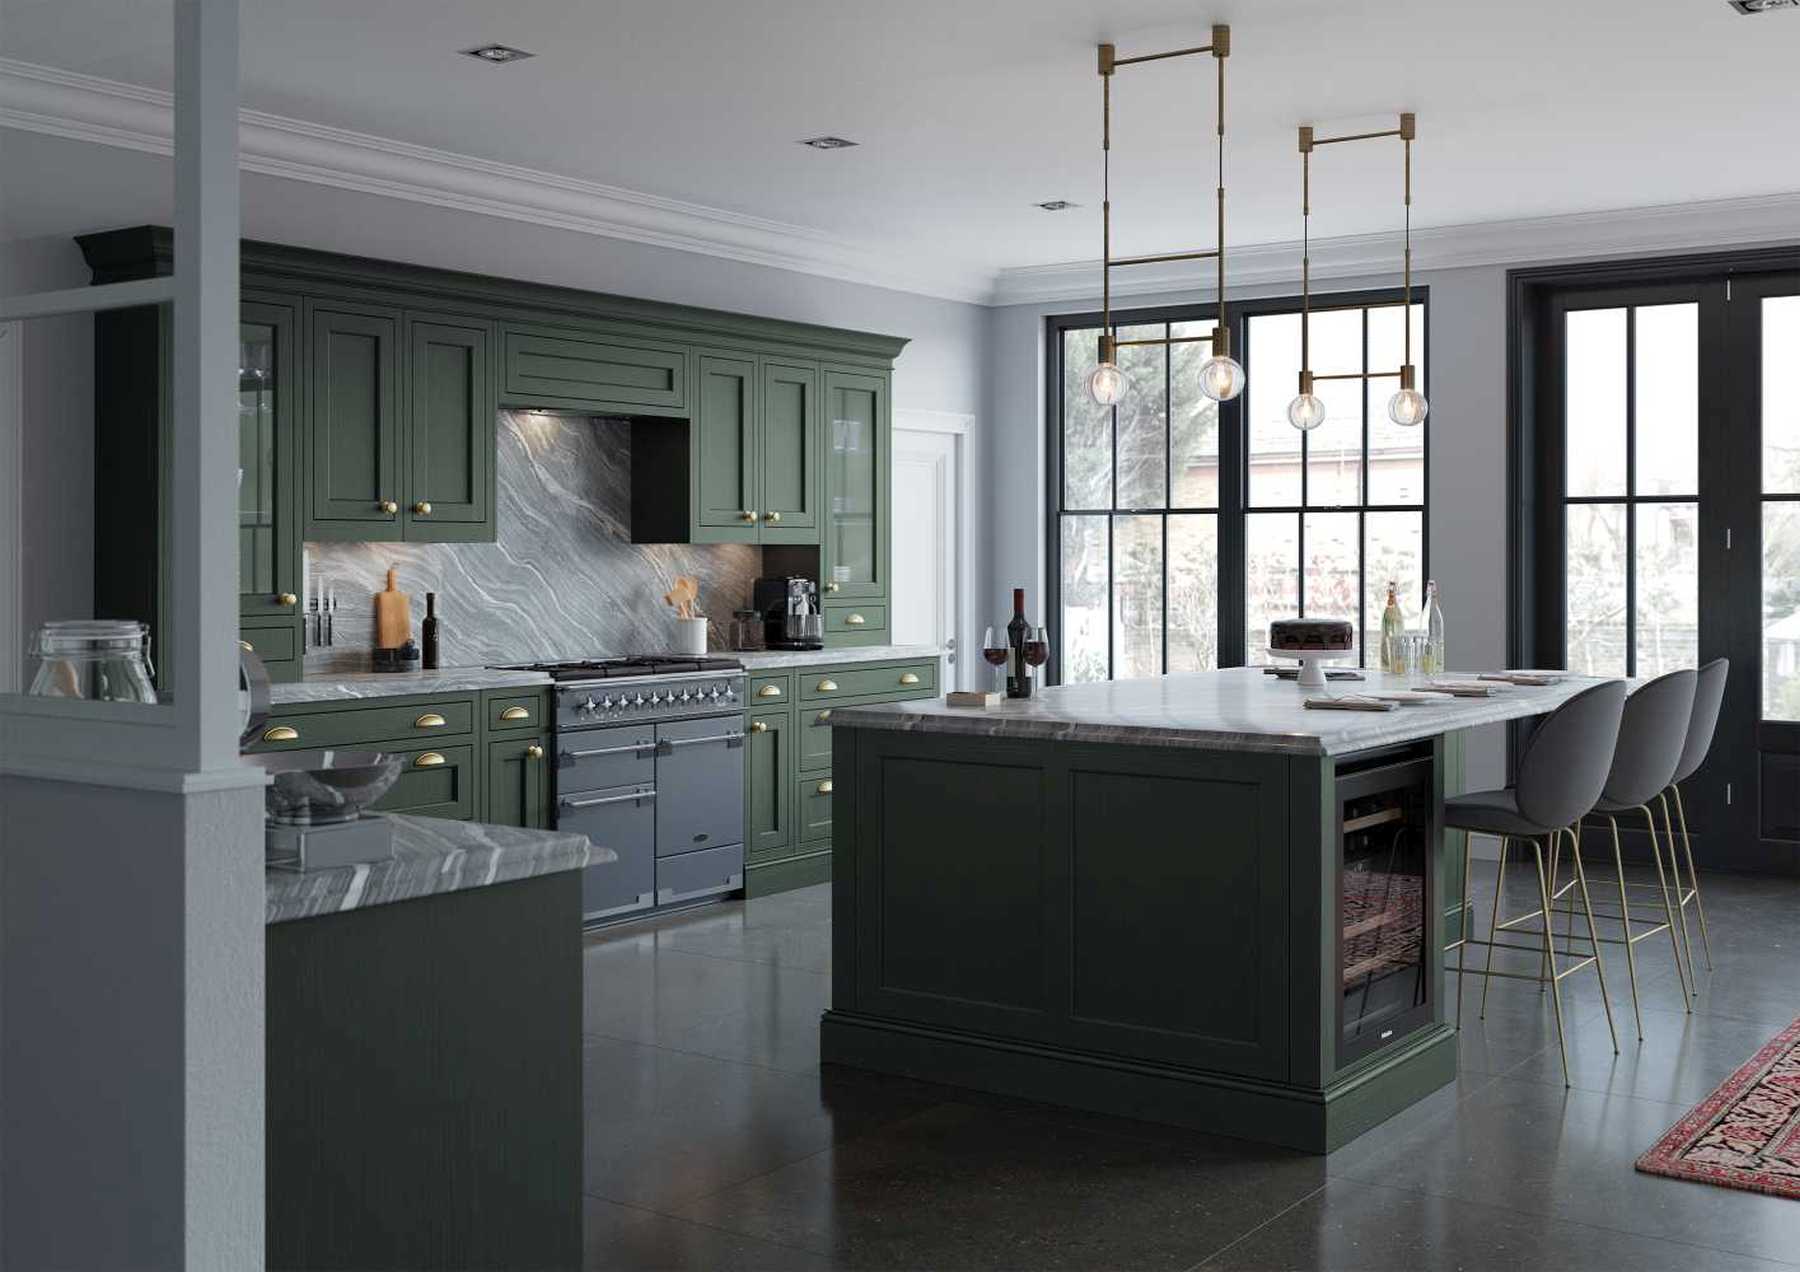 Luxurious inframe kitchen in forest green main pic